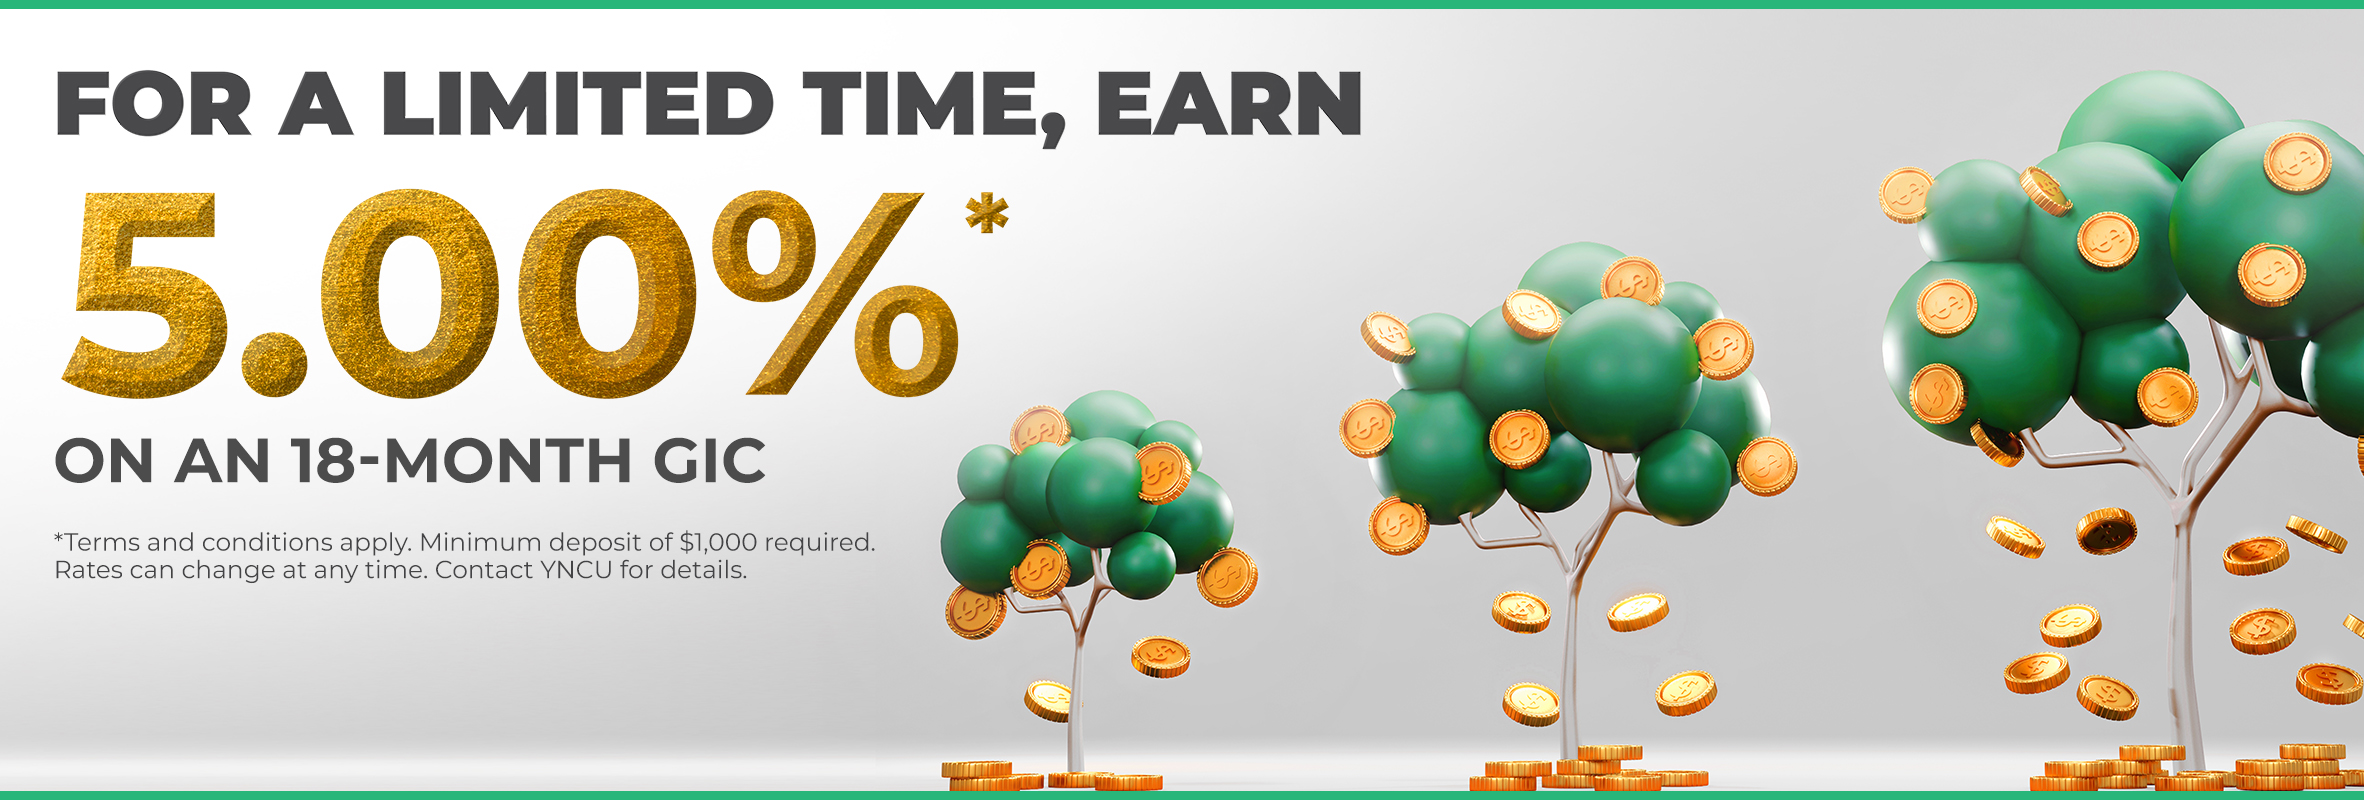 Trees with coins falling from them with text reading for a limited time earn 5.00% on a 30 month GIC